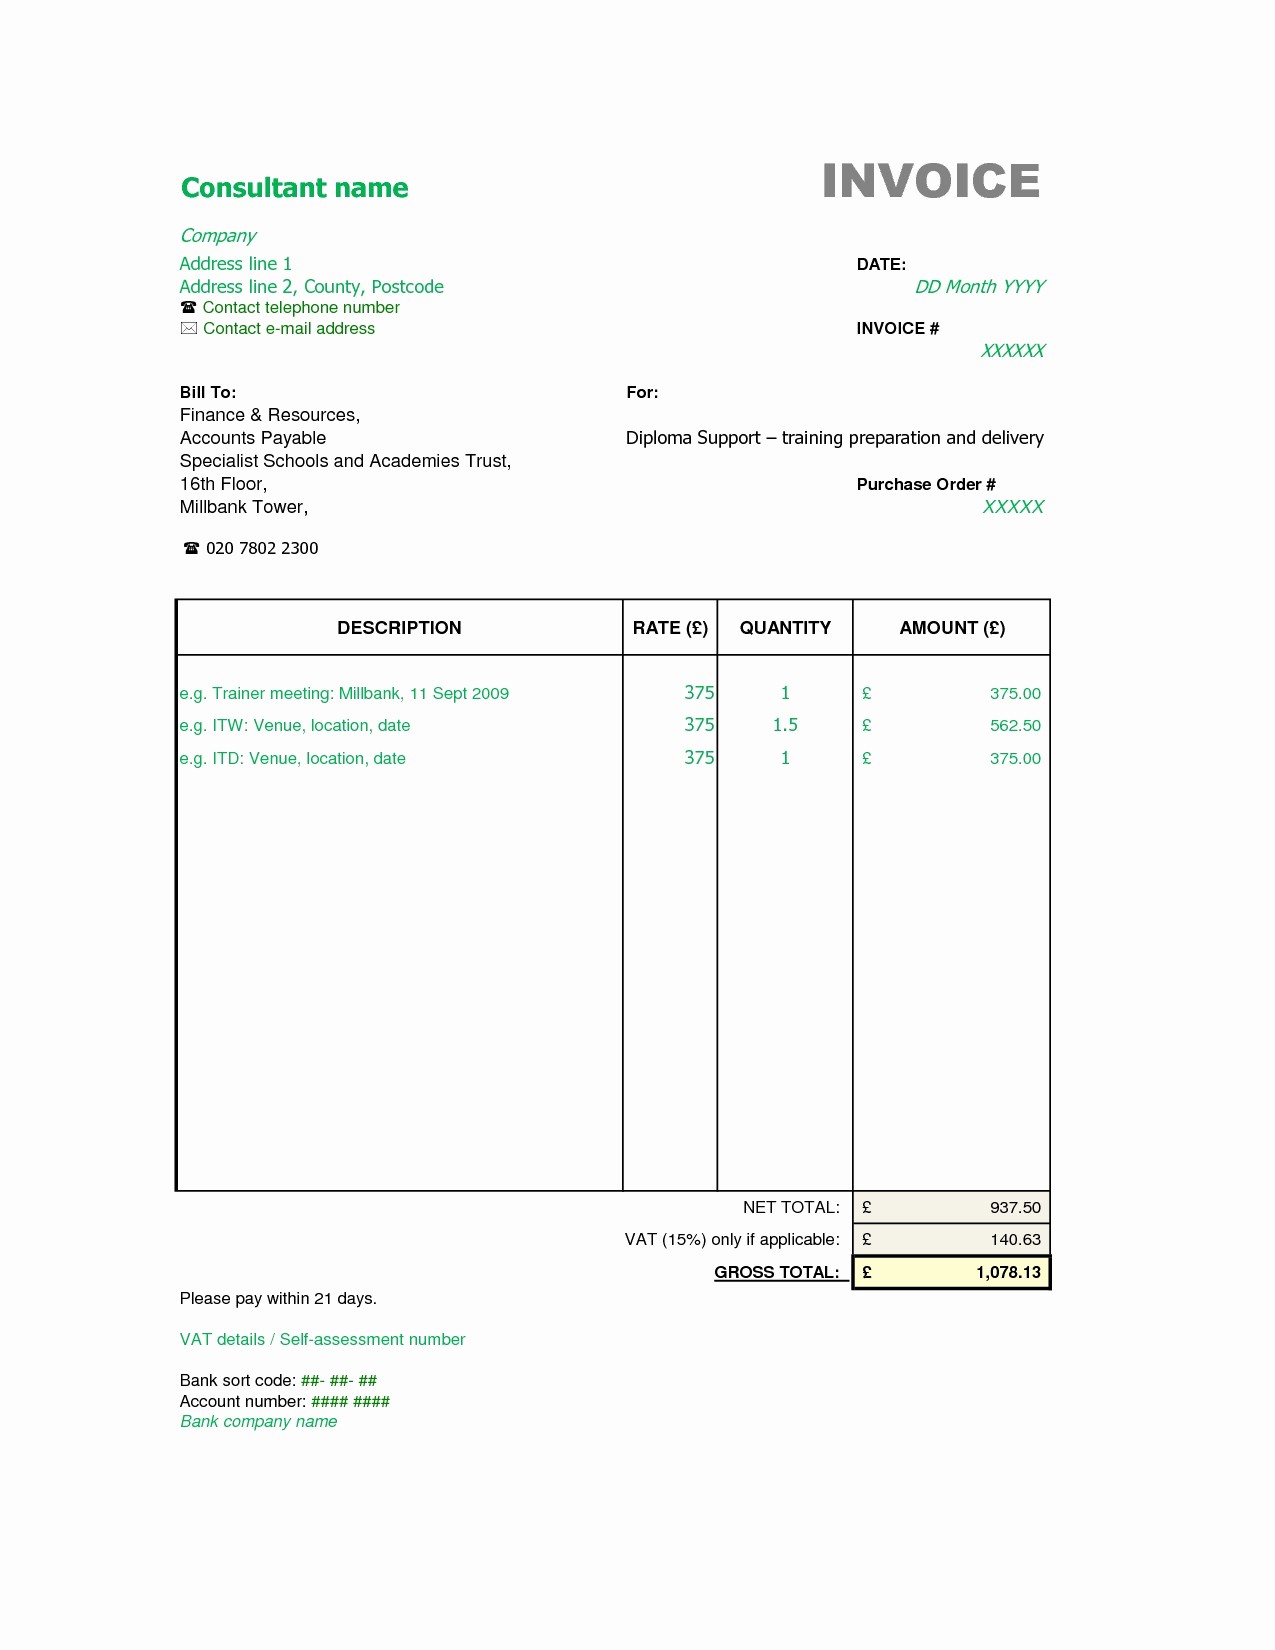 Sample Invoice format In Excel Lovely Consultant Invoice format Invoice Template Ideas